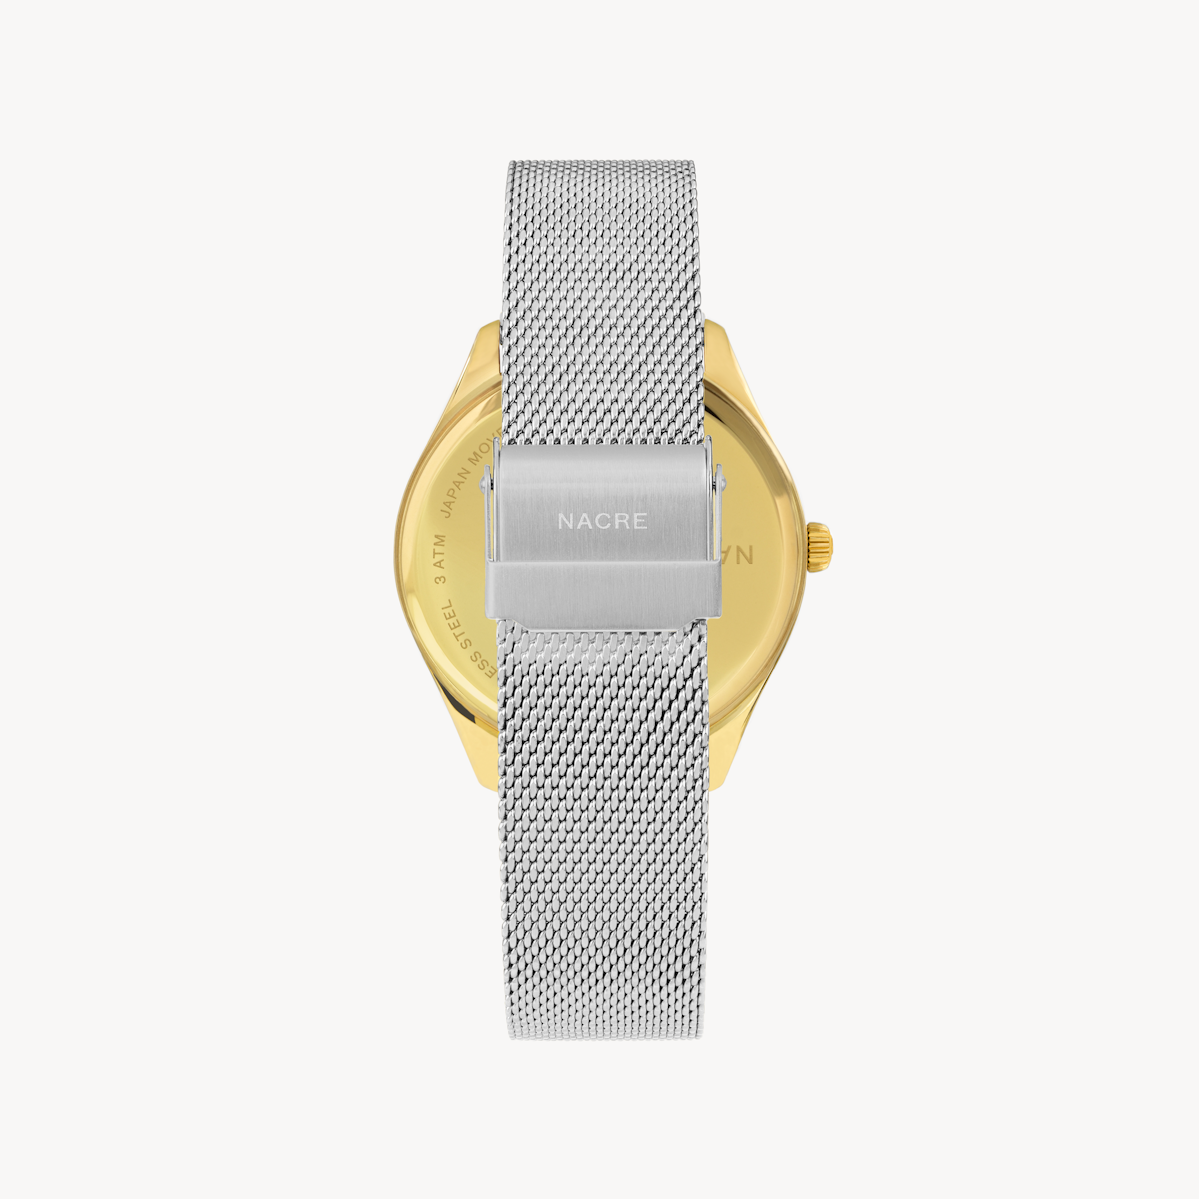 Lune 8 - Gold and White - Stainless Steel Mesh